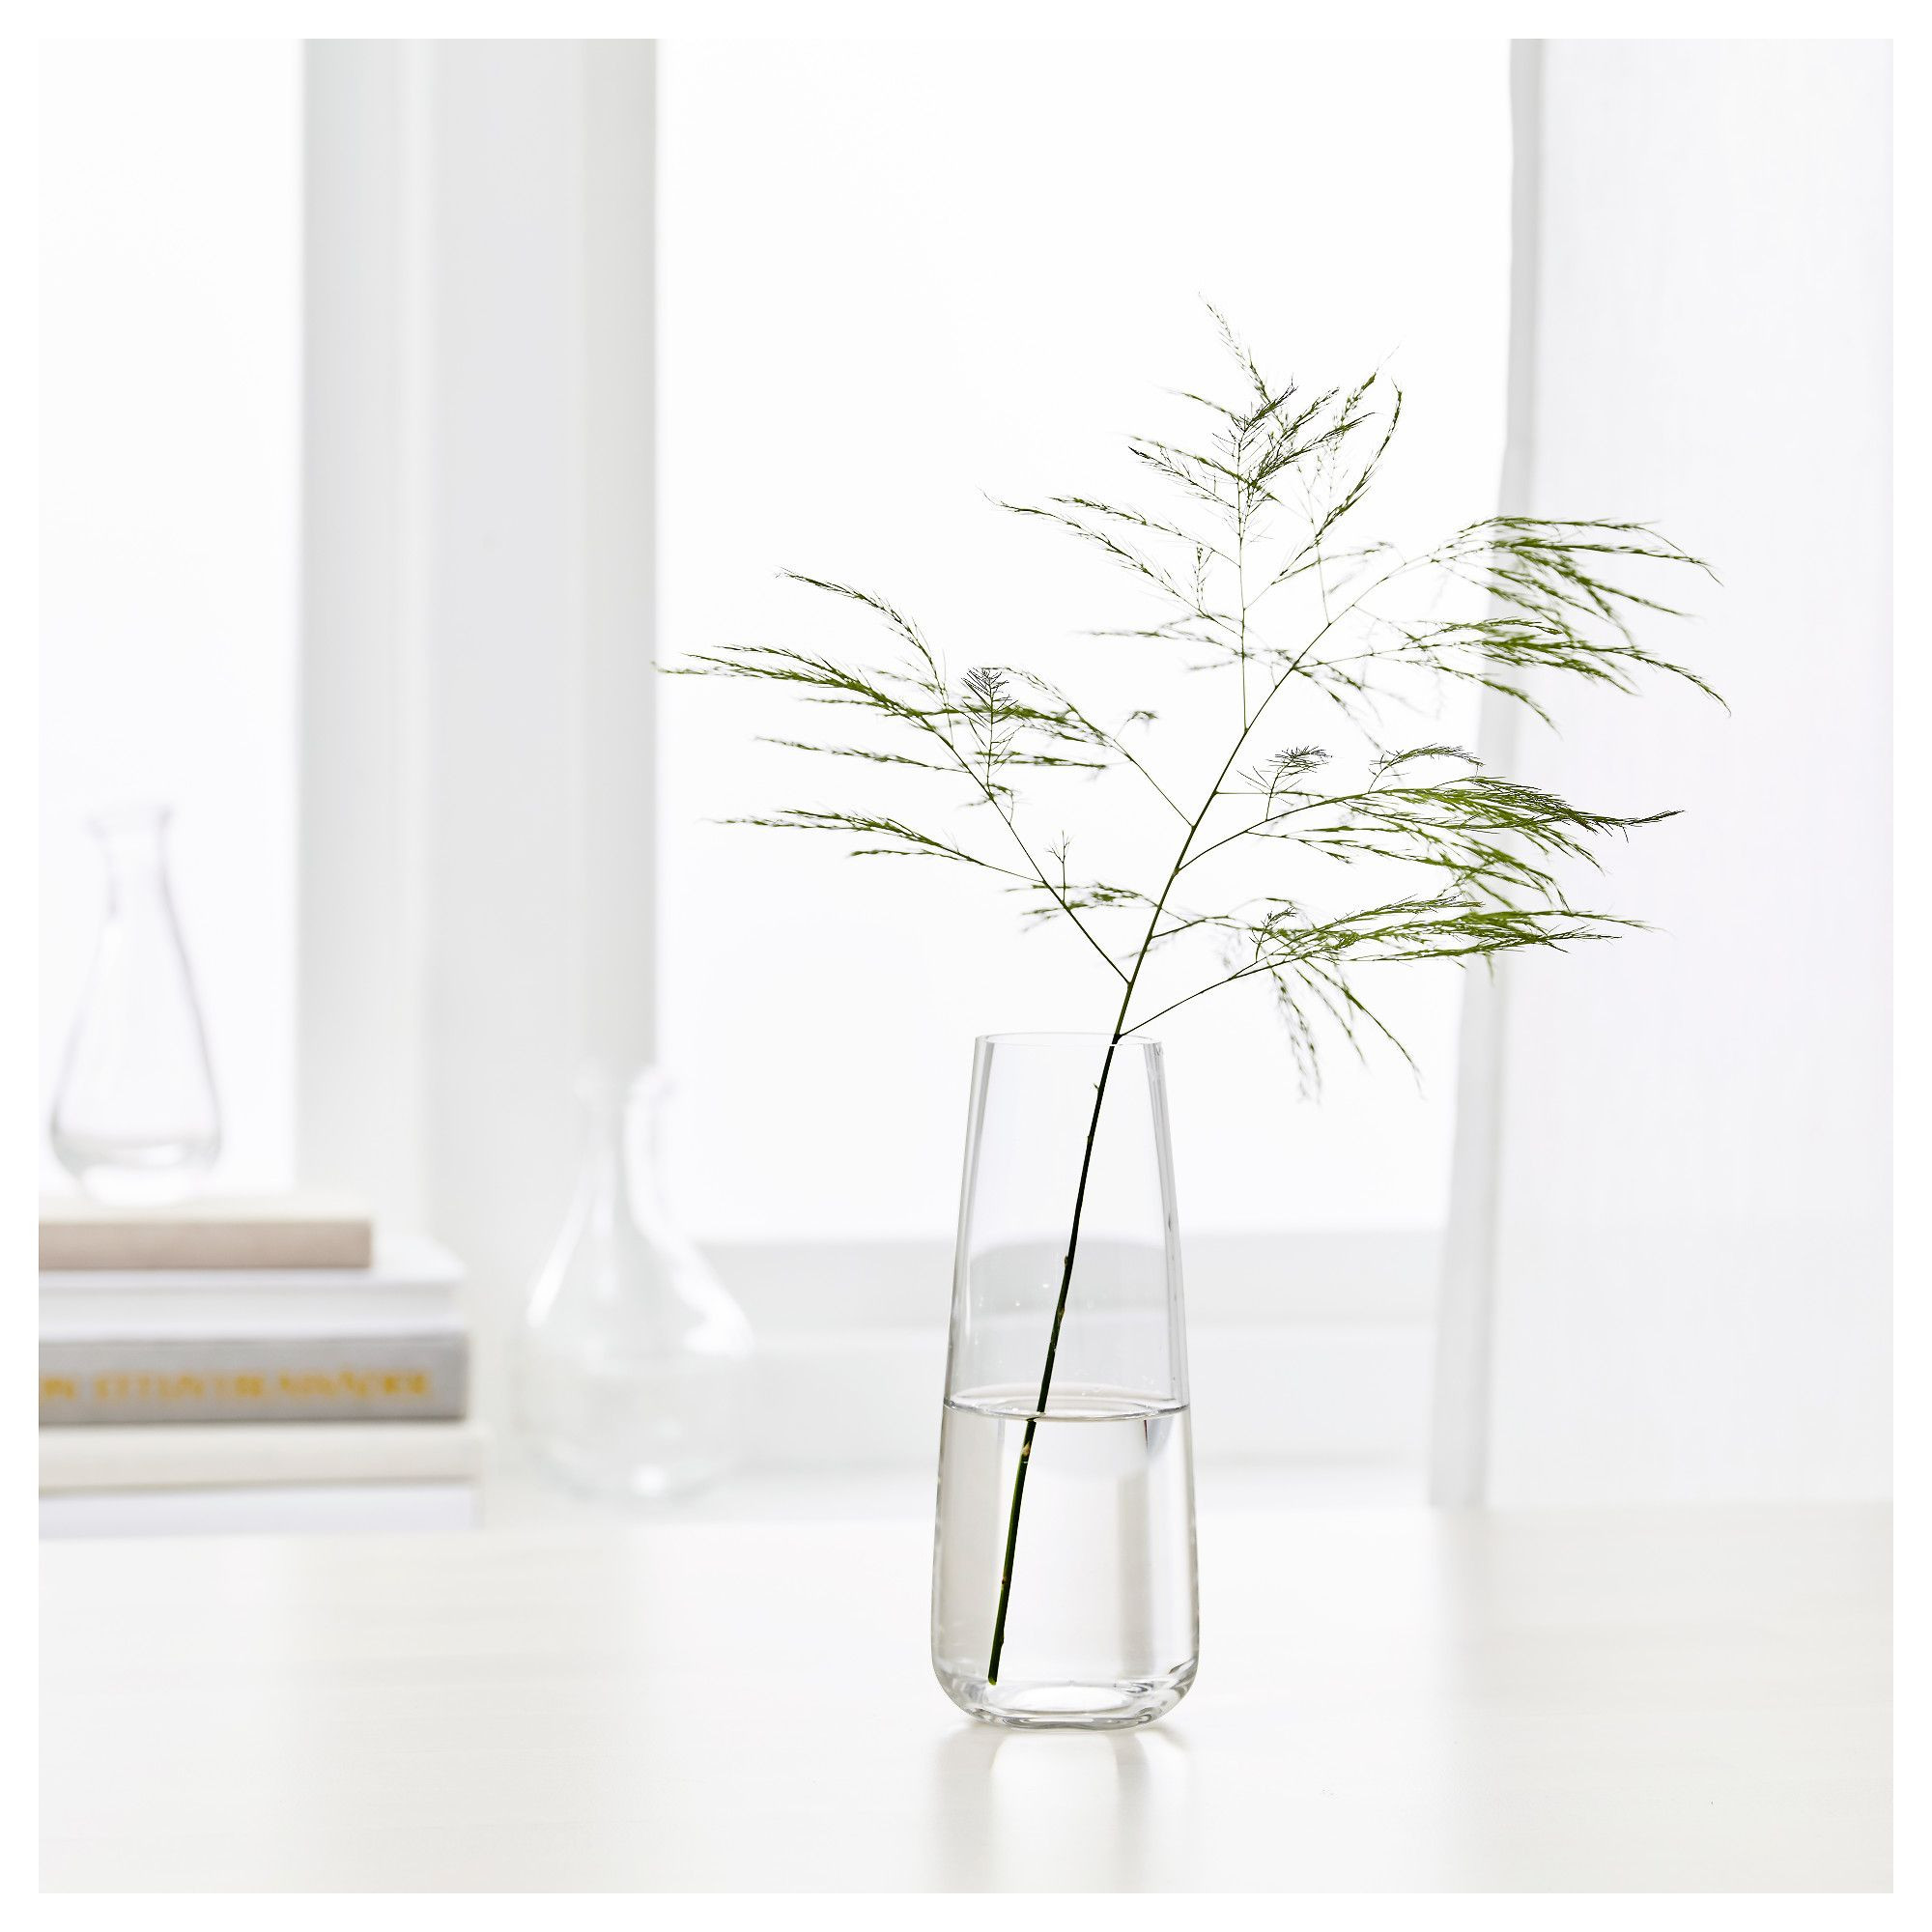 28 Awesome Short Glass Cylinder Vases 2022 free download short glass cylinder vases of ikea berac284kna vase clear glass cag 60 pinterest with regard to ikea berac284kna vase you can easily make a beautiful floral arrangement with just a single fl